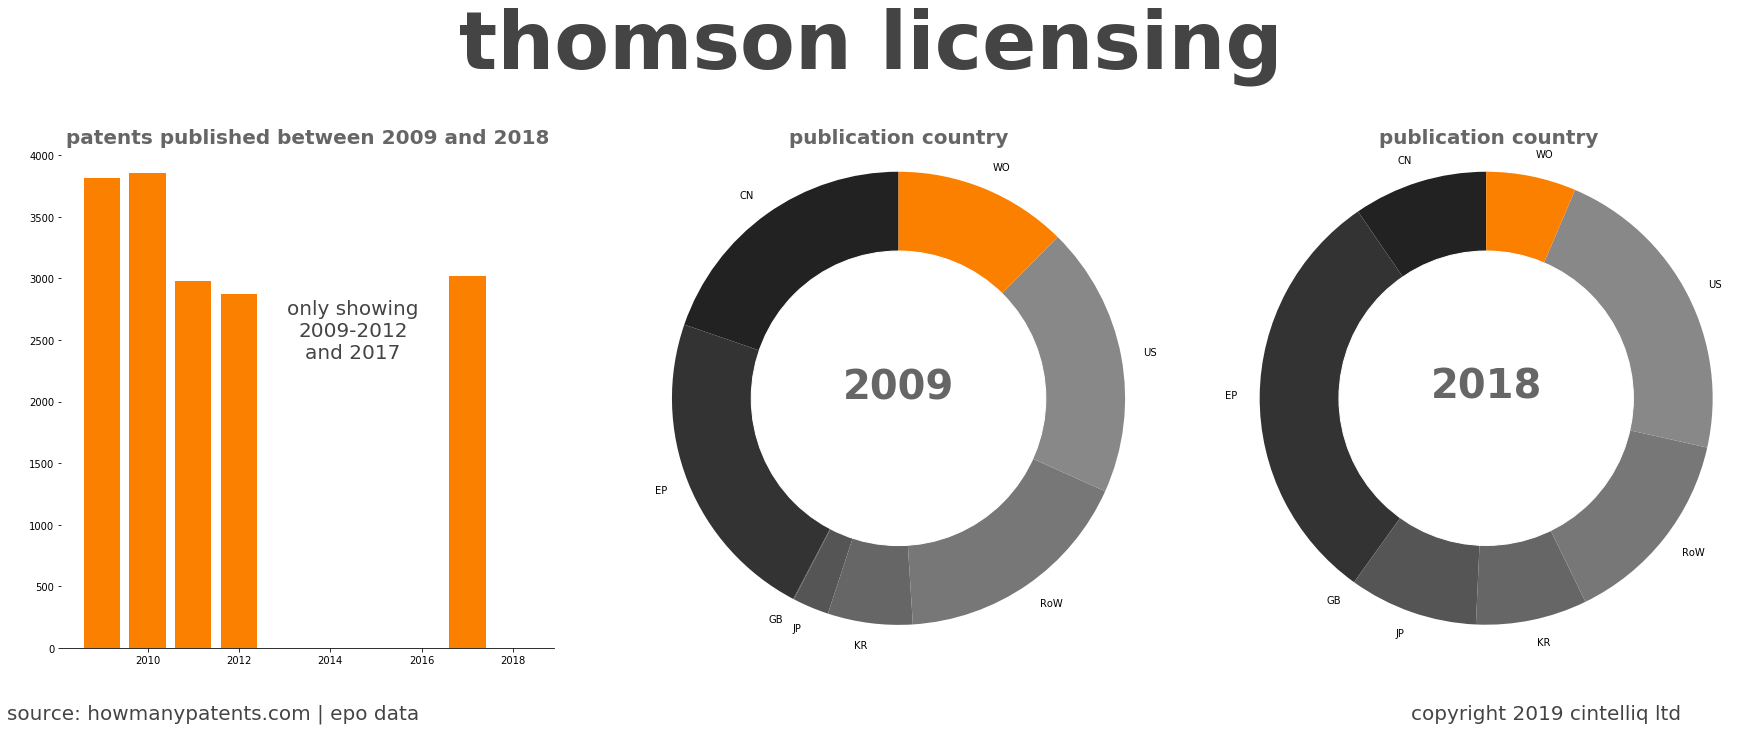 summary of patents for Thomson Licensing